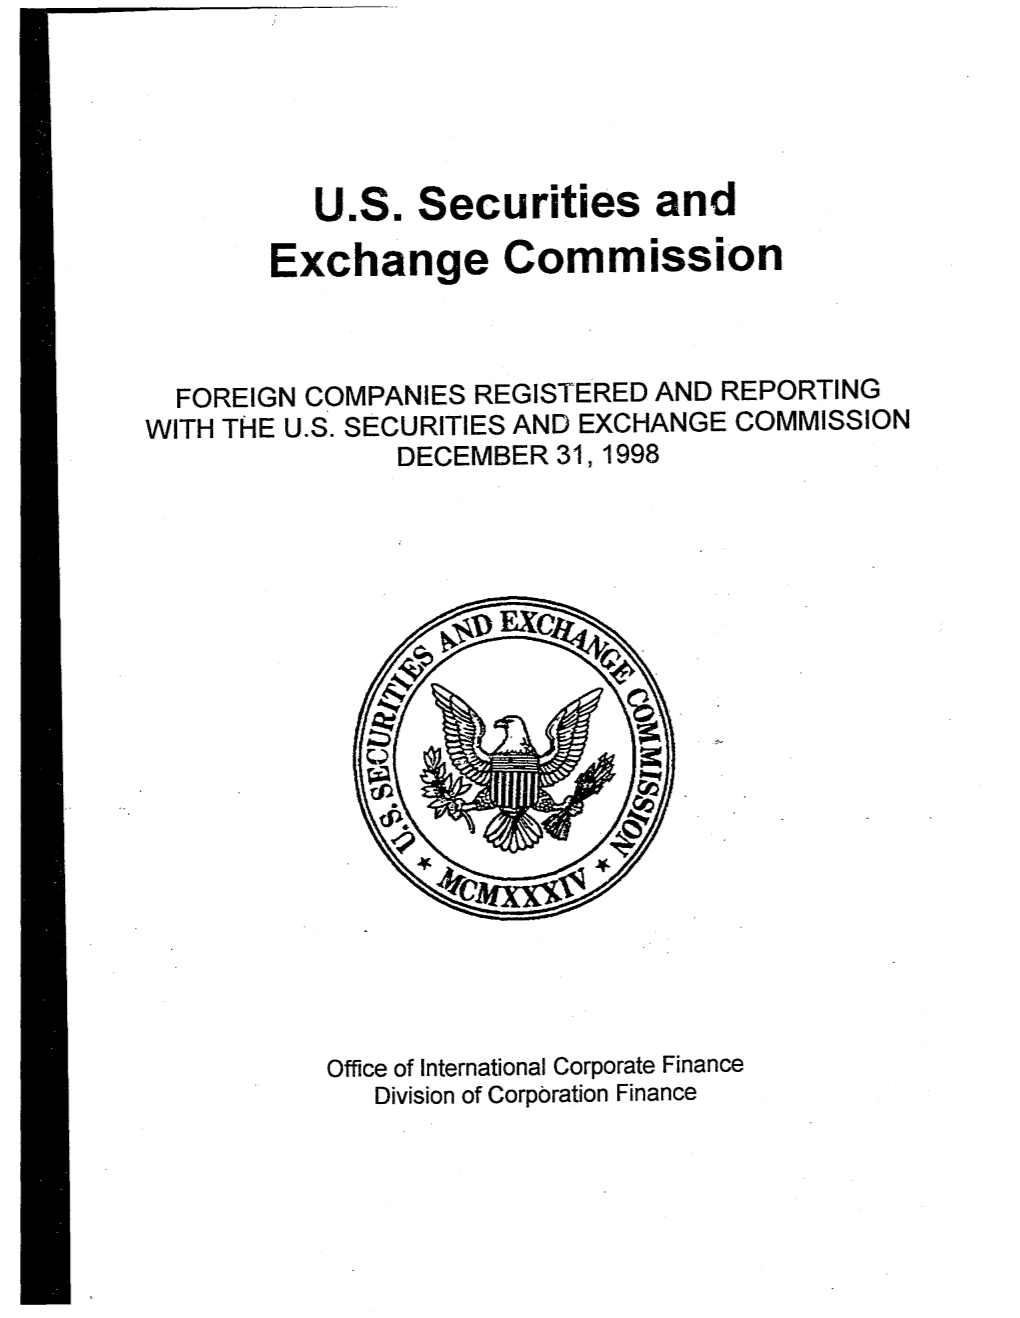 Foreign Private Issuers Lists, 1998